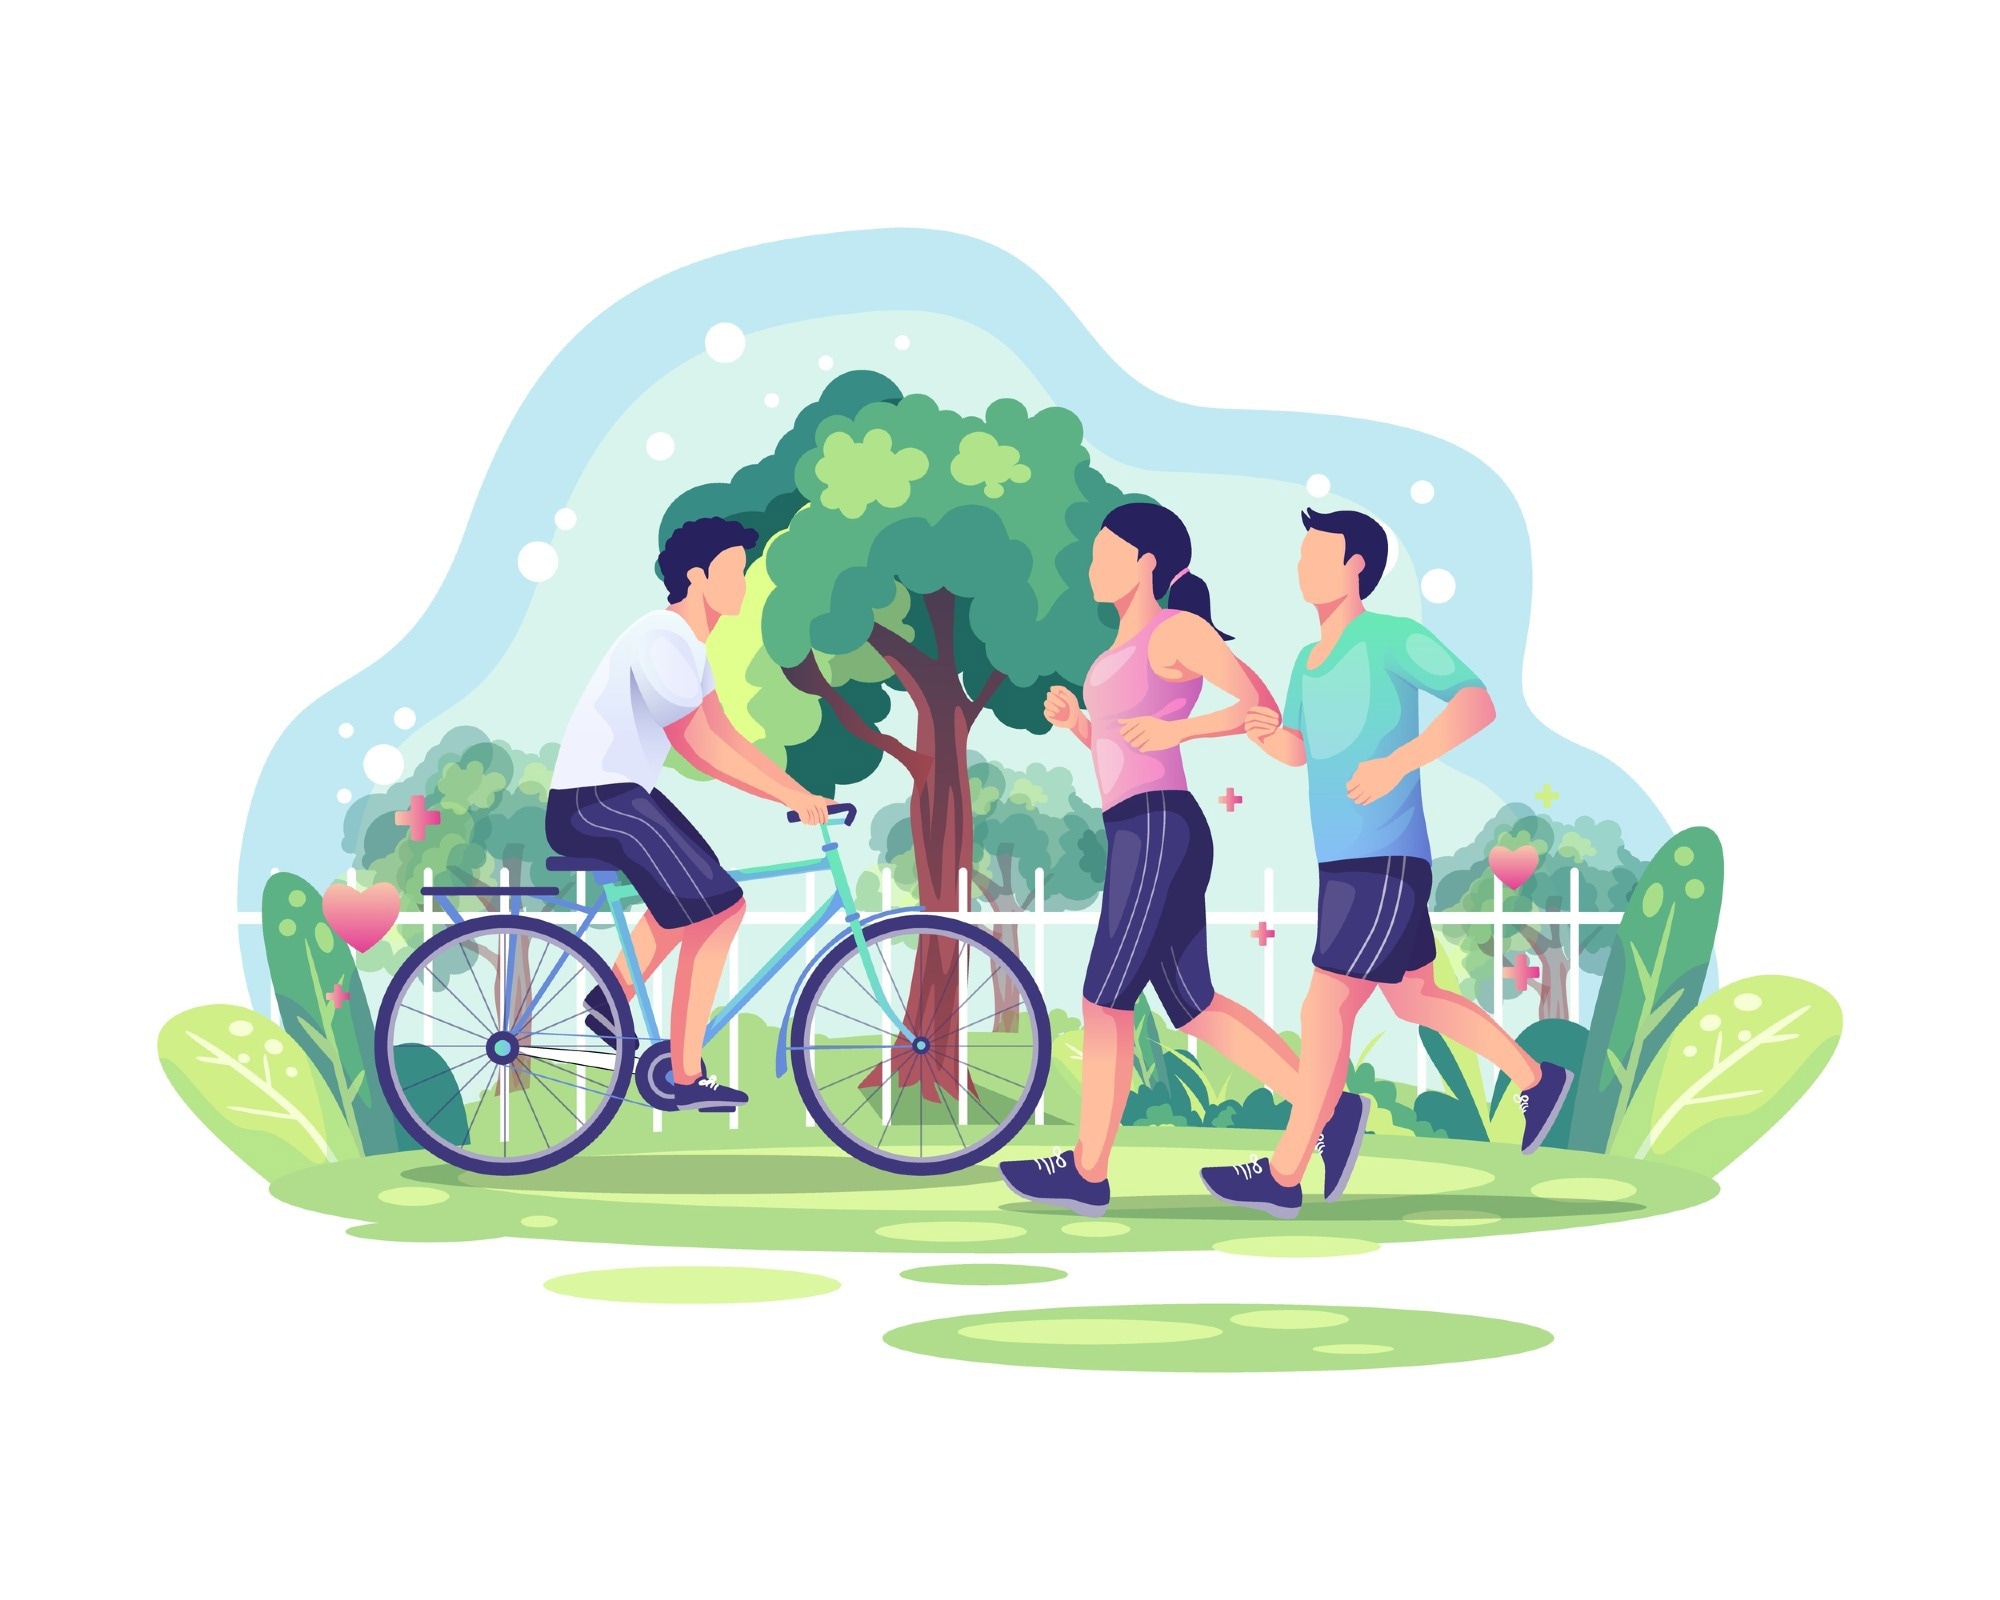 Study: Characteristics and impact of physical activity interventions during substance use disorder treatment excluding tobacco: A systematic review. Image Credit: agny_illustration/Shutterstock.com